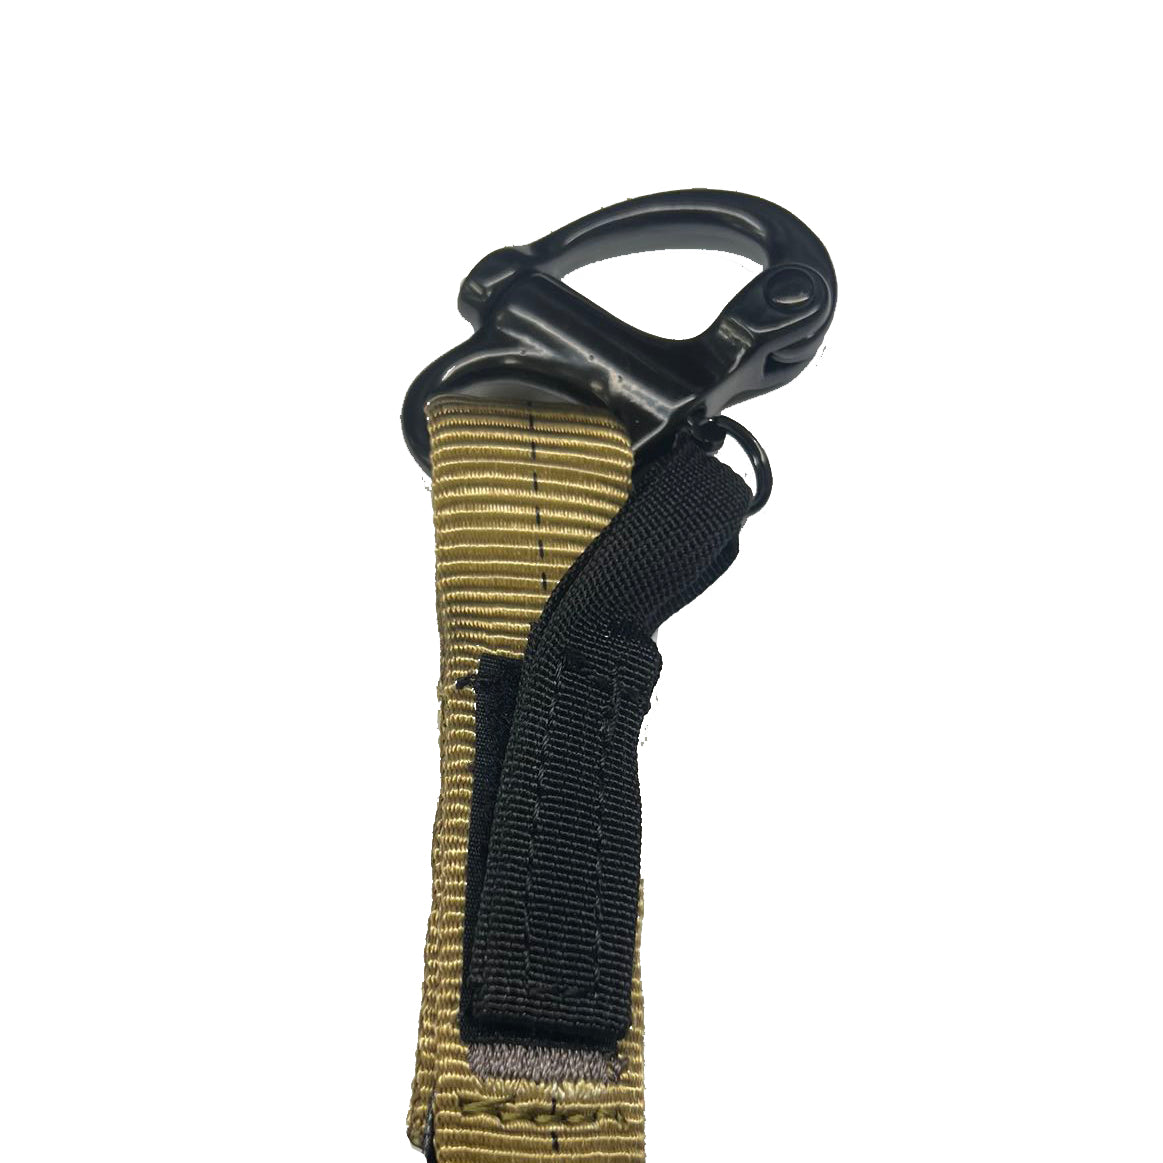 Helo Lanyard CYB with Snap Shackle & Hitched Loop